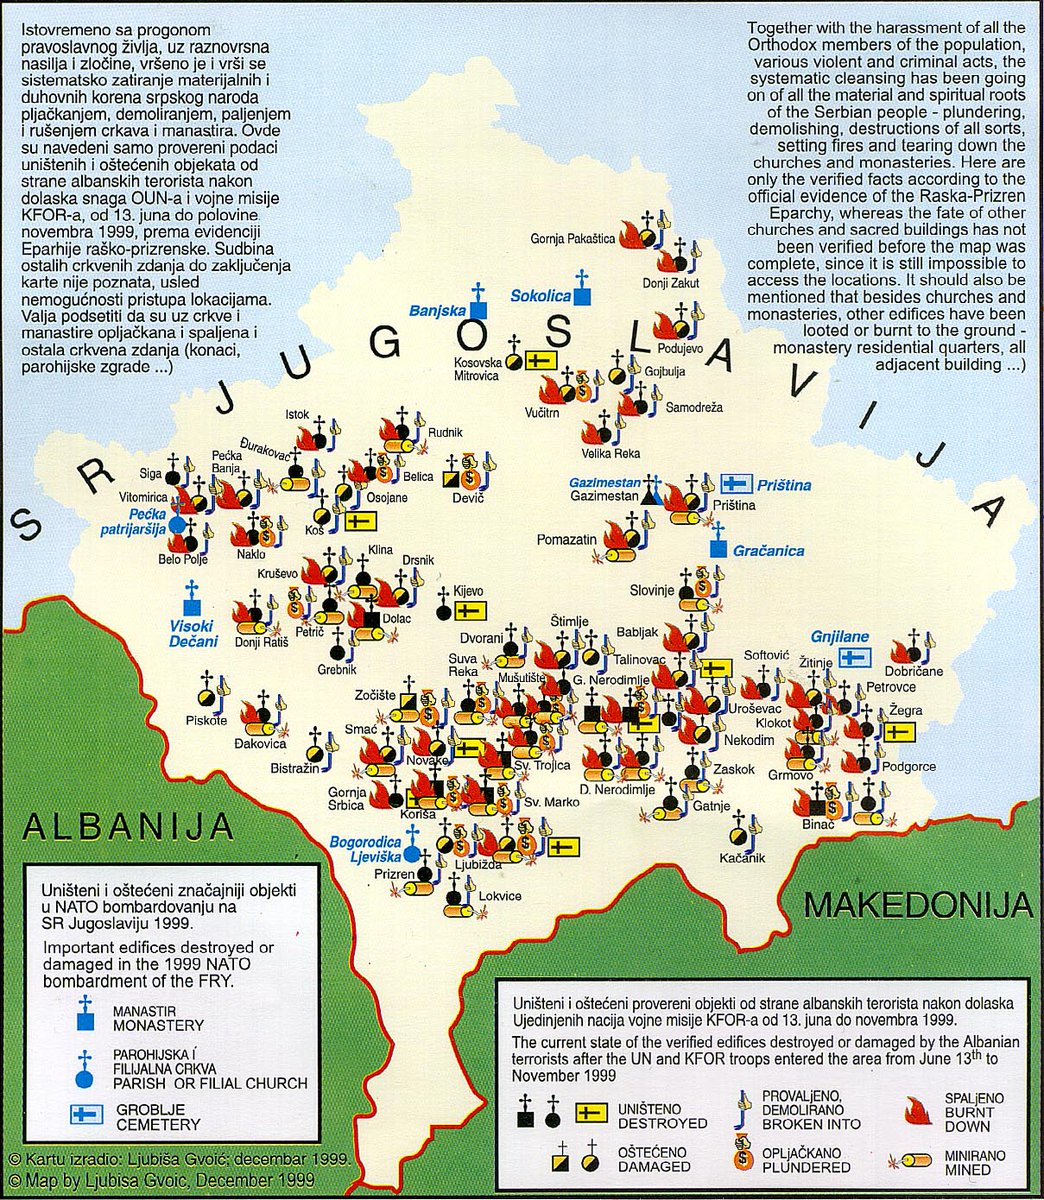 Between June 1999 and March 2004. around 155  #SerbianOrthodox churches and monasteries were destroyed by Albanians.Do you see similarities with recent events in the USA and around the world where  #Antifa terrorists used to burn and destroy cities? 